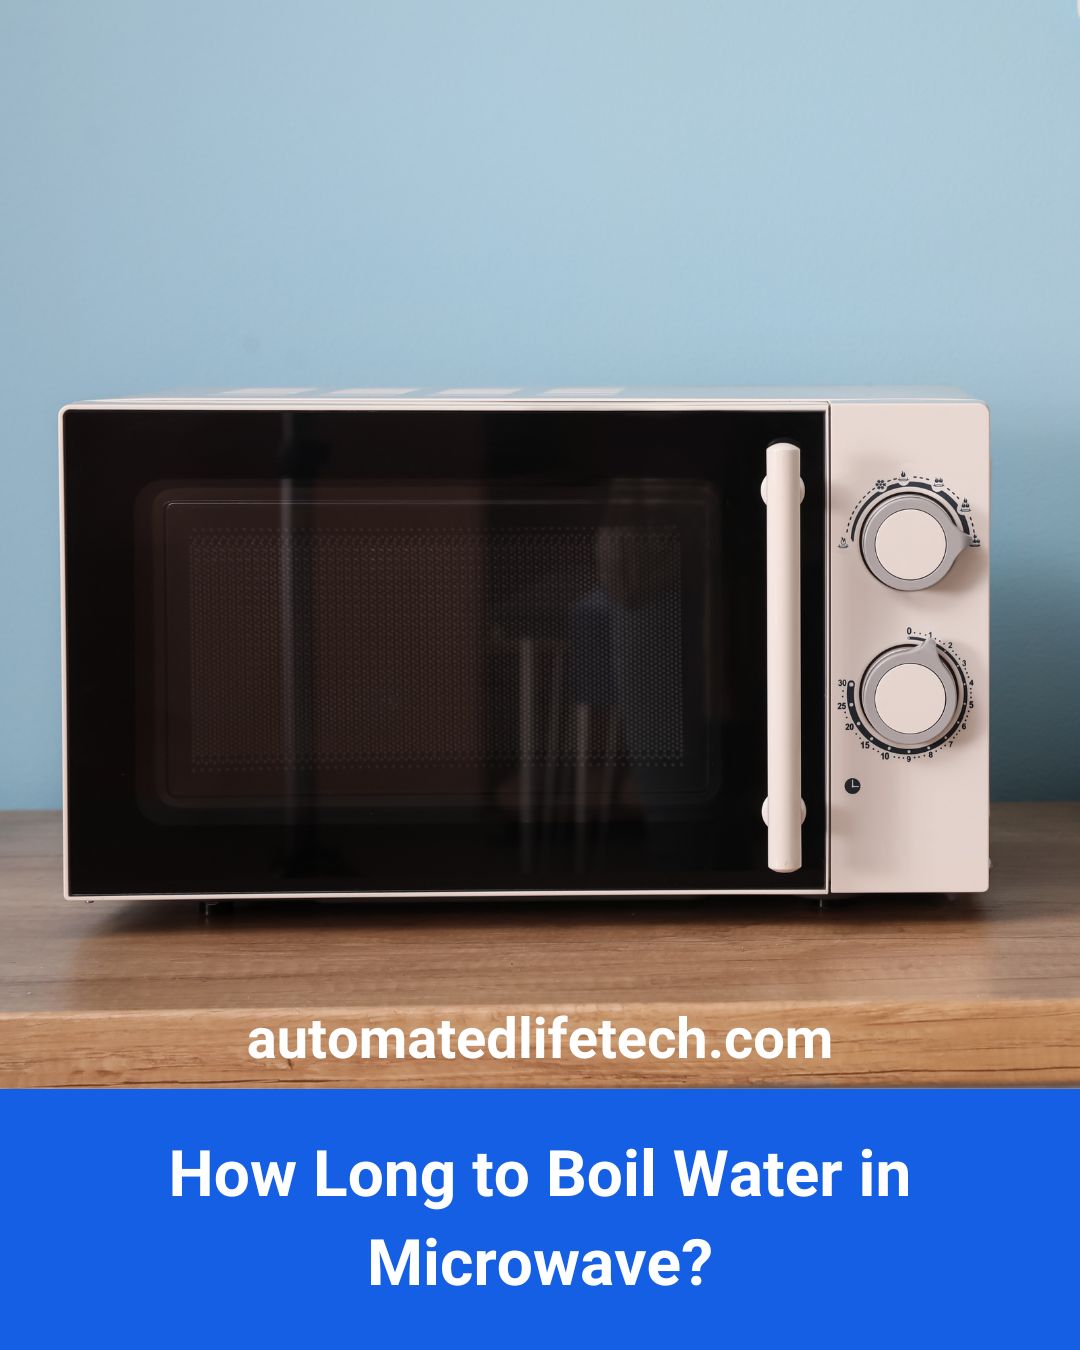 How Long to Boil Water in Microwave